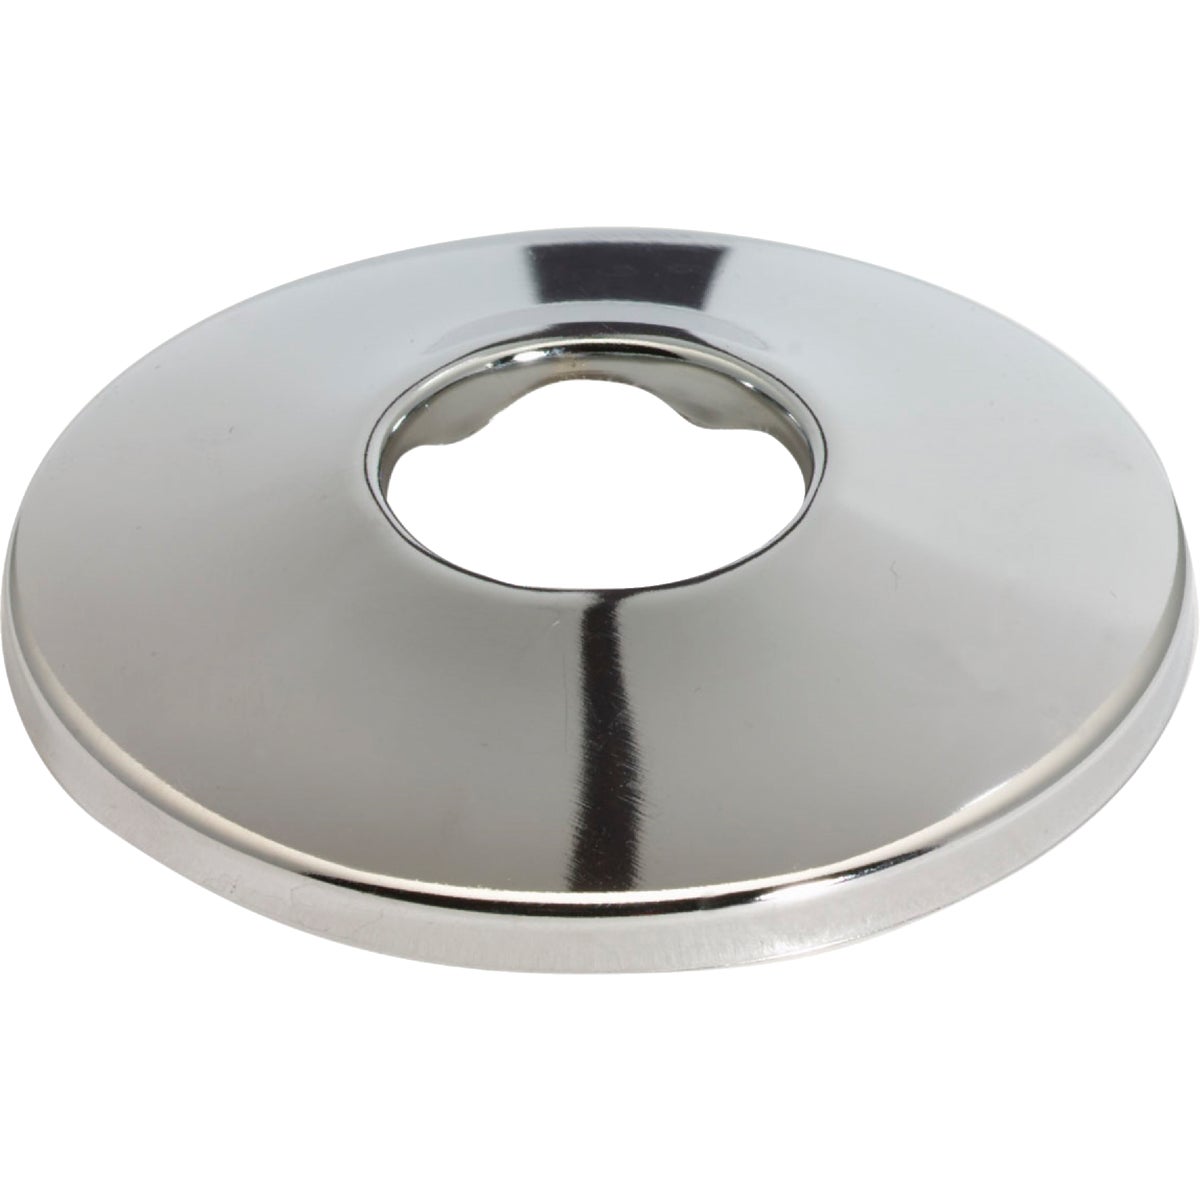 Item 496315, Shallow flange with durable copper construction and chrome-plated finish